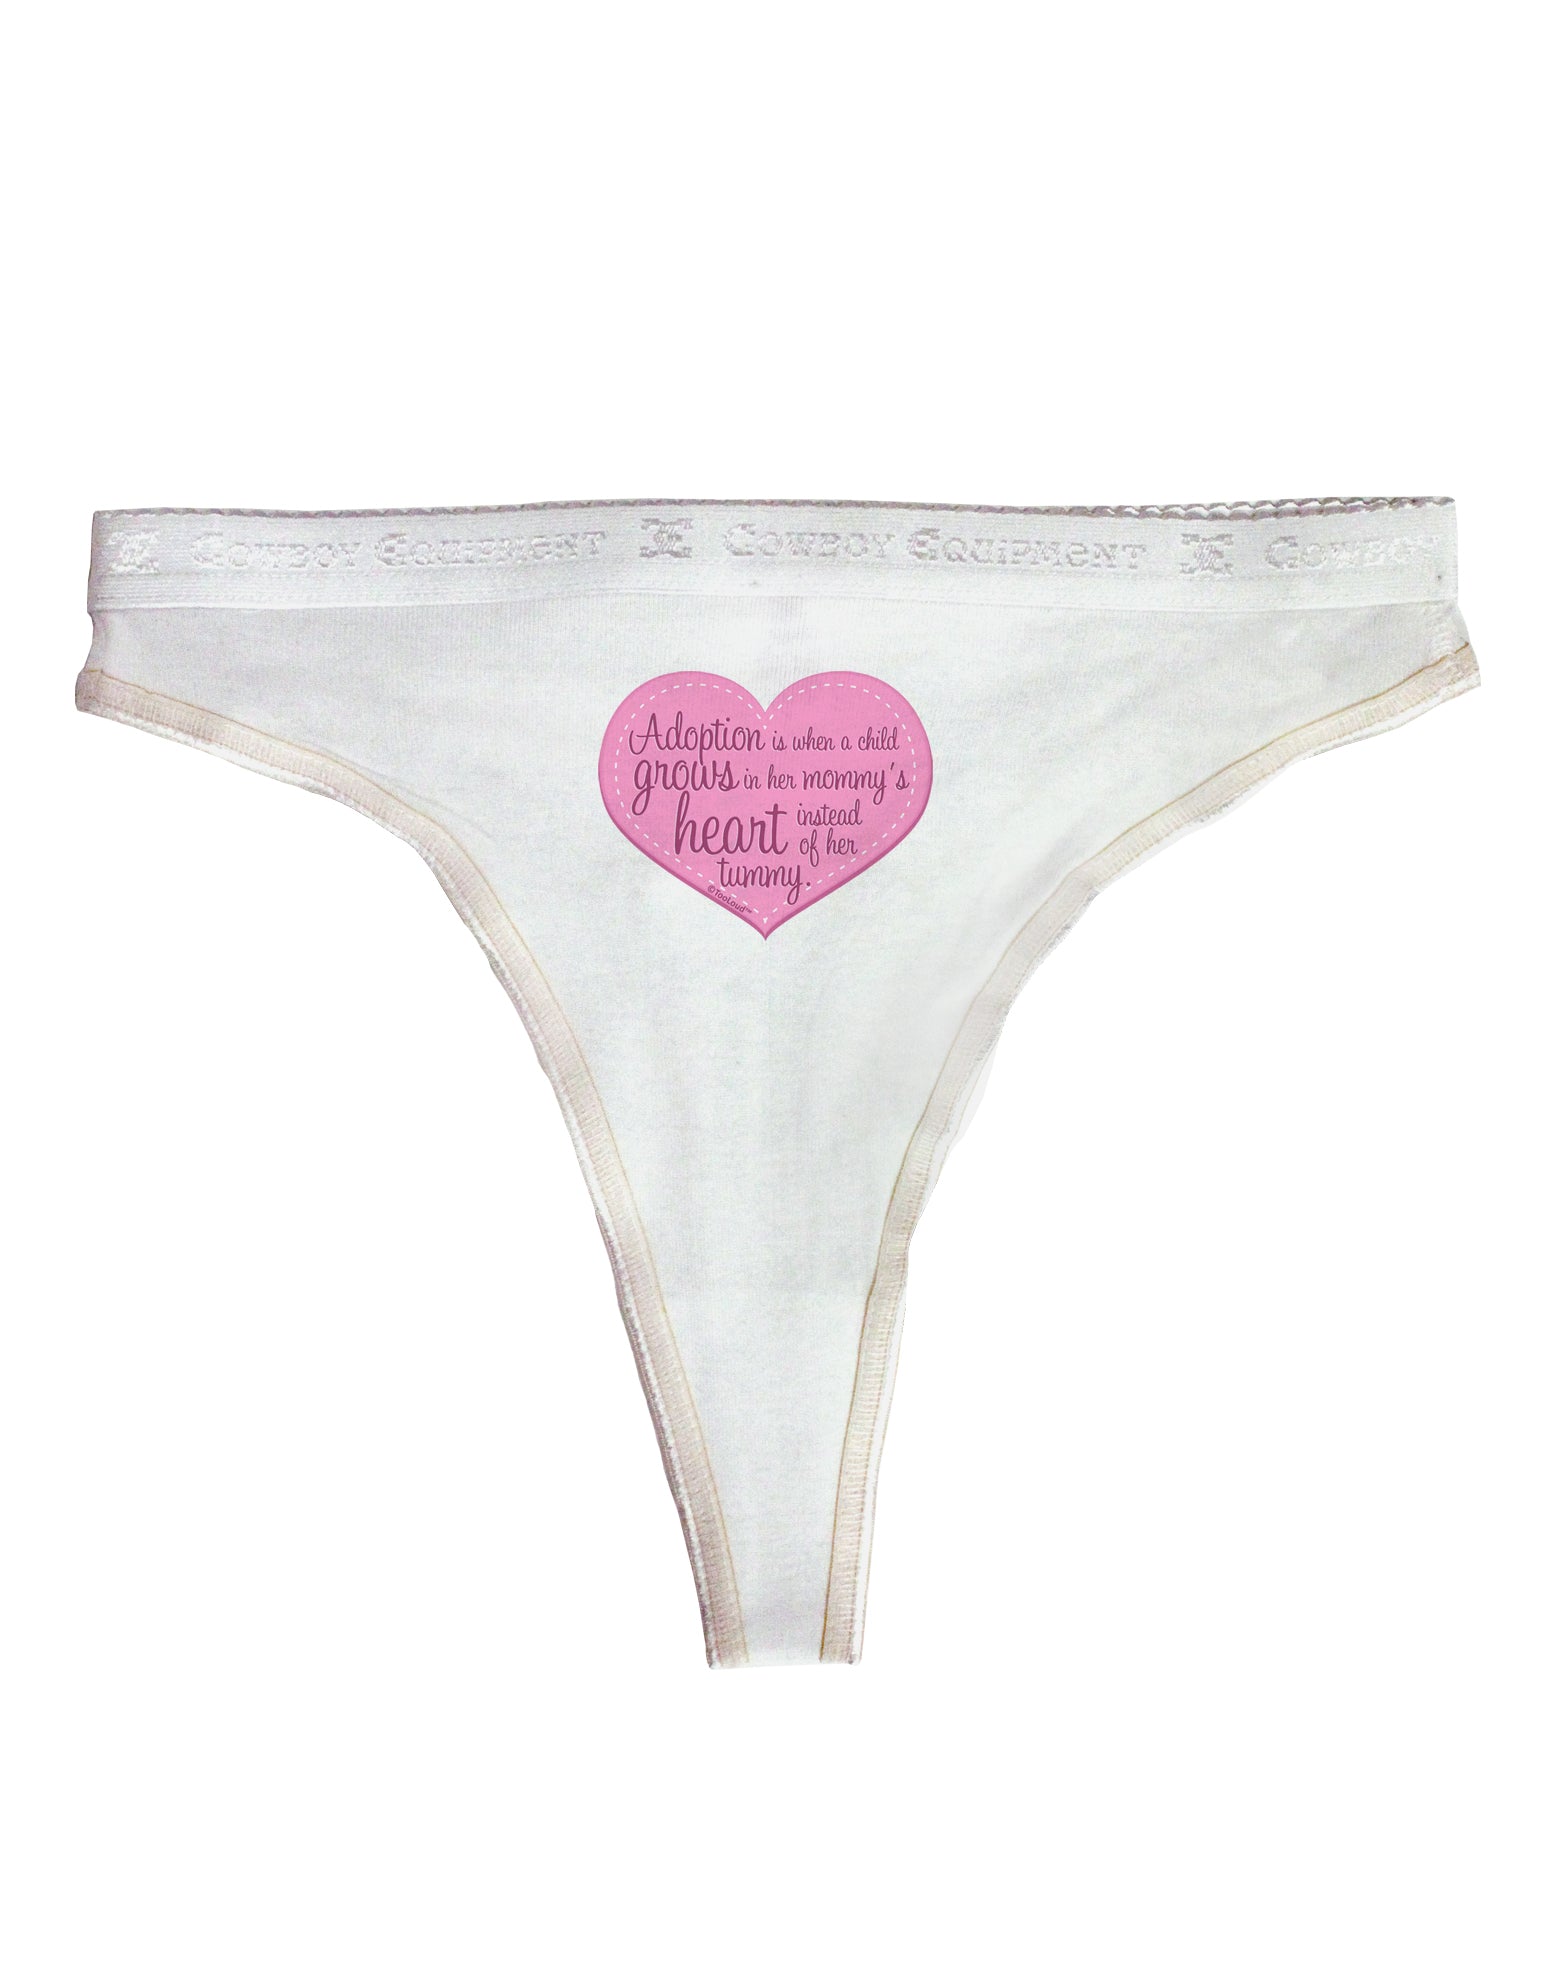 Adoption is When - Mom and Daughter Quote Womens Thong Underwear